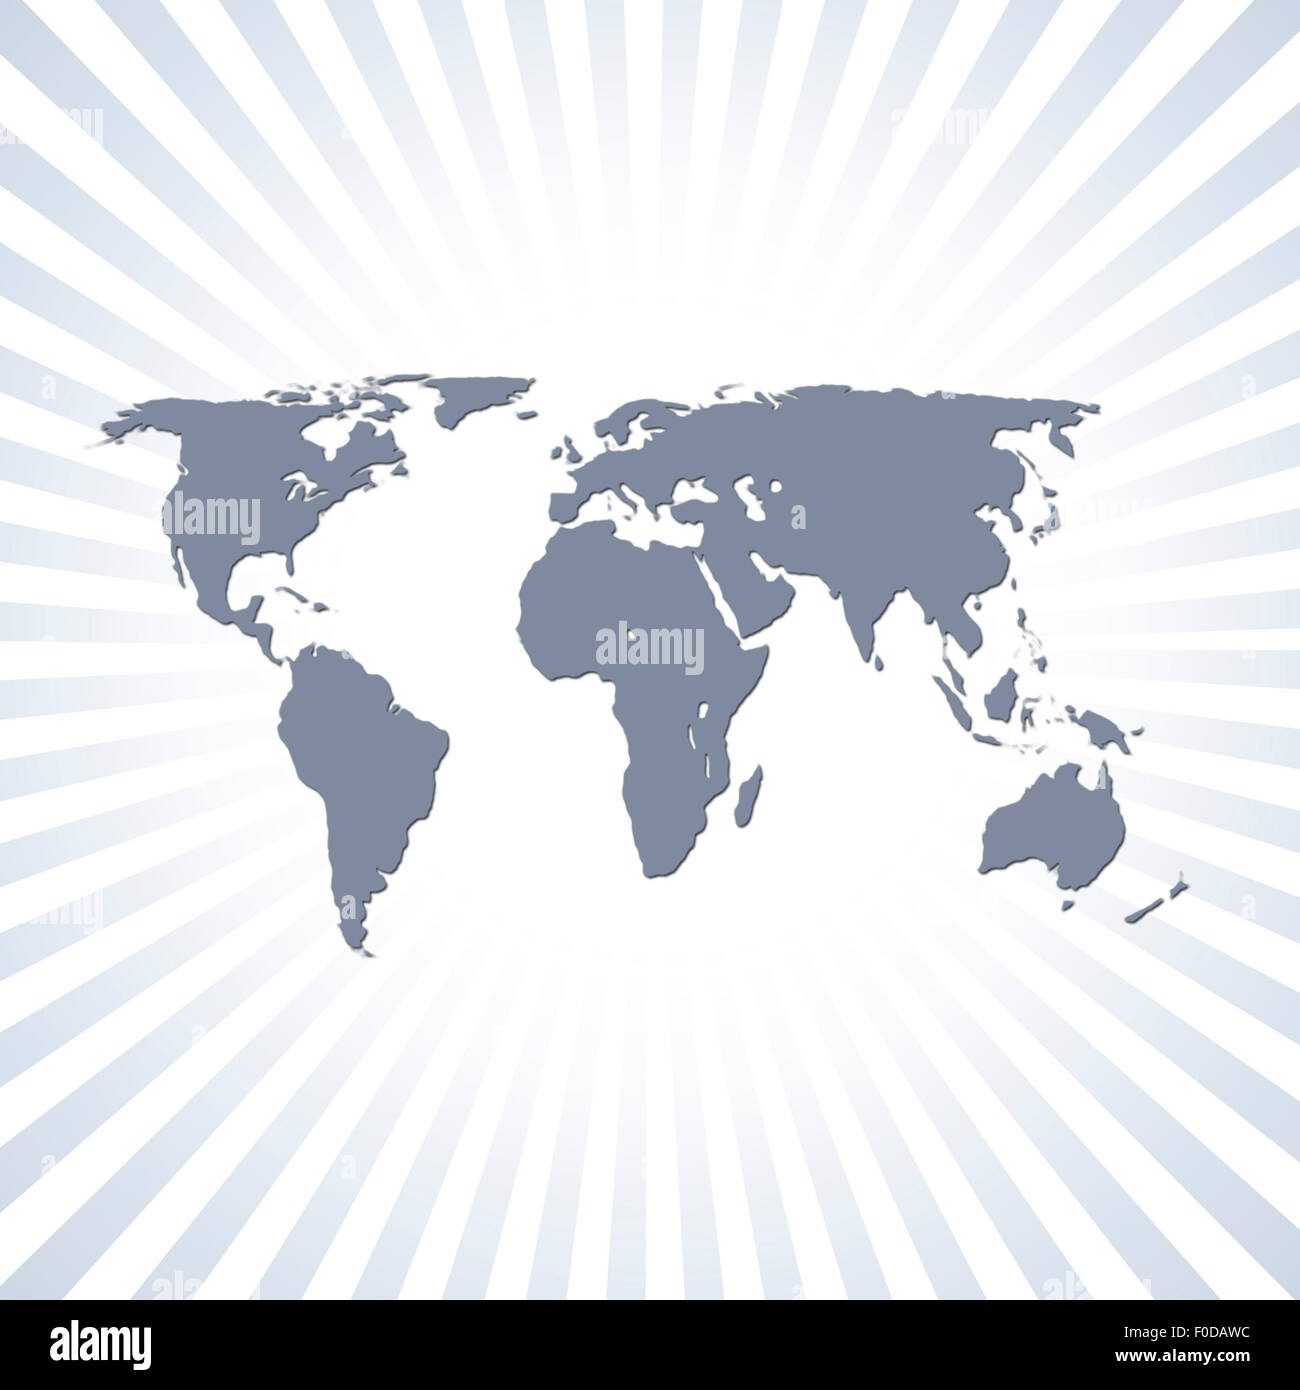 Outline map of world over stripe background Stock Photo